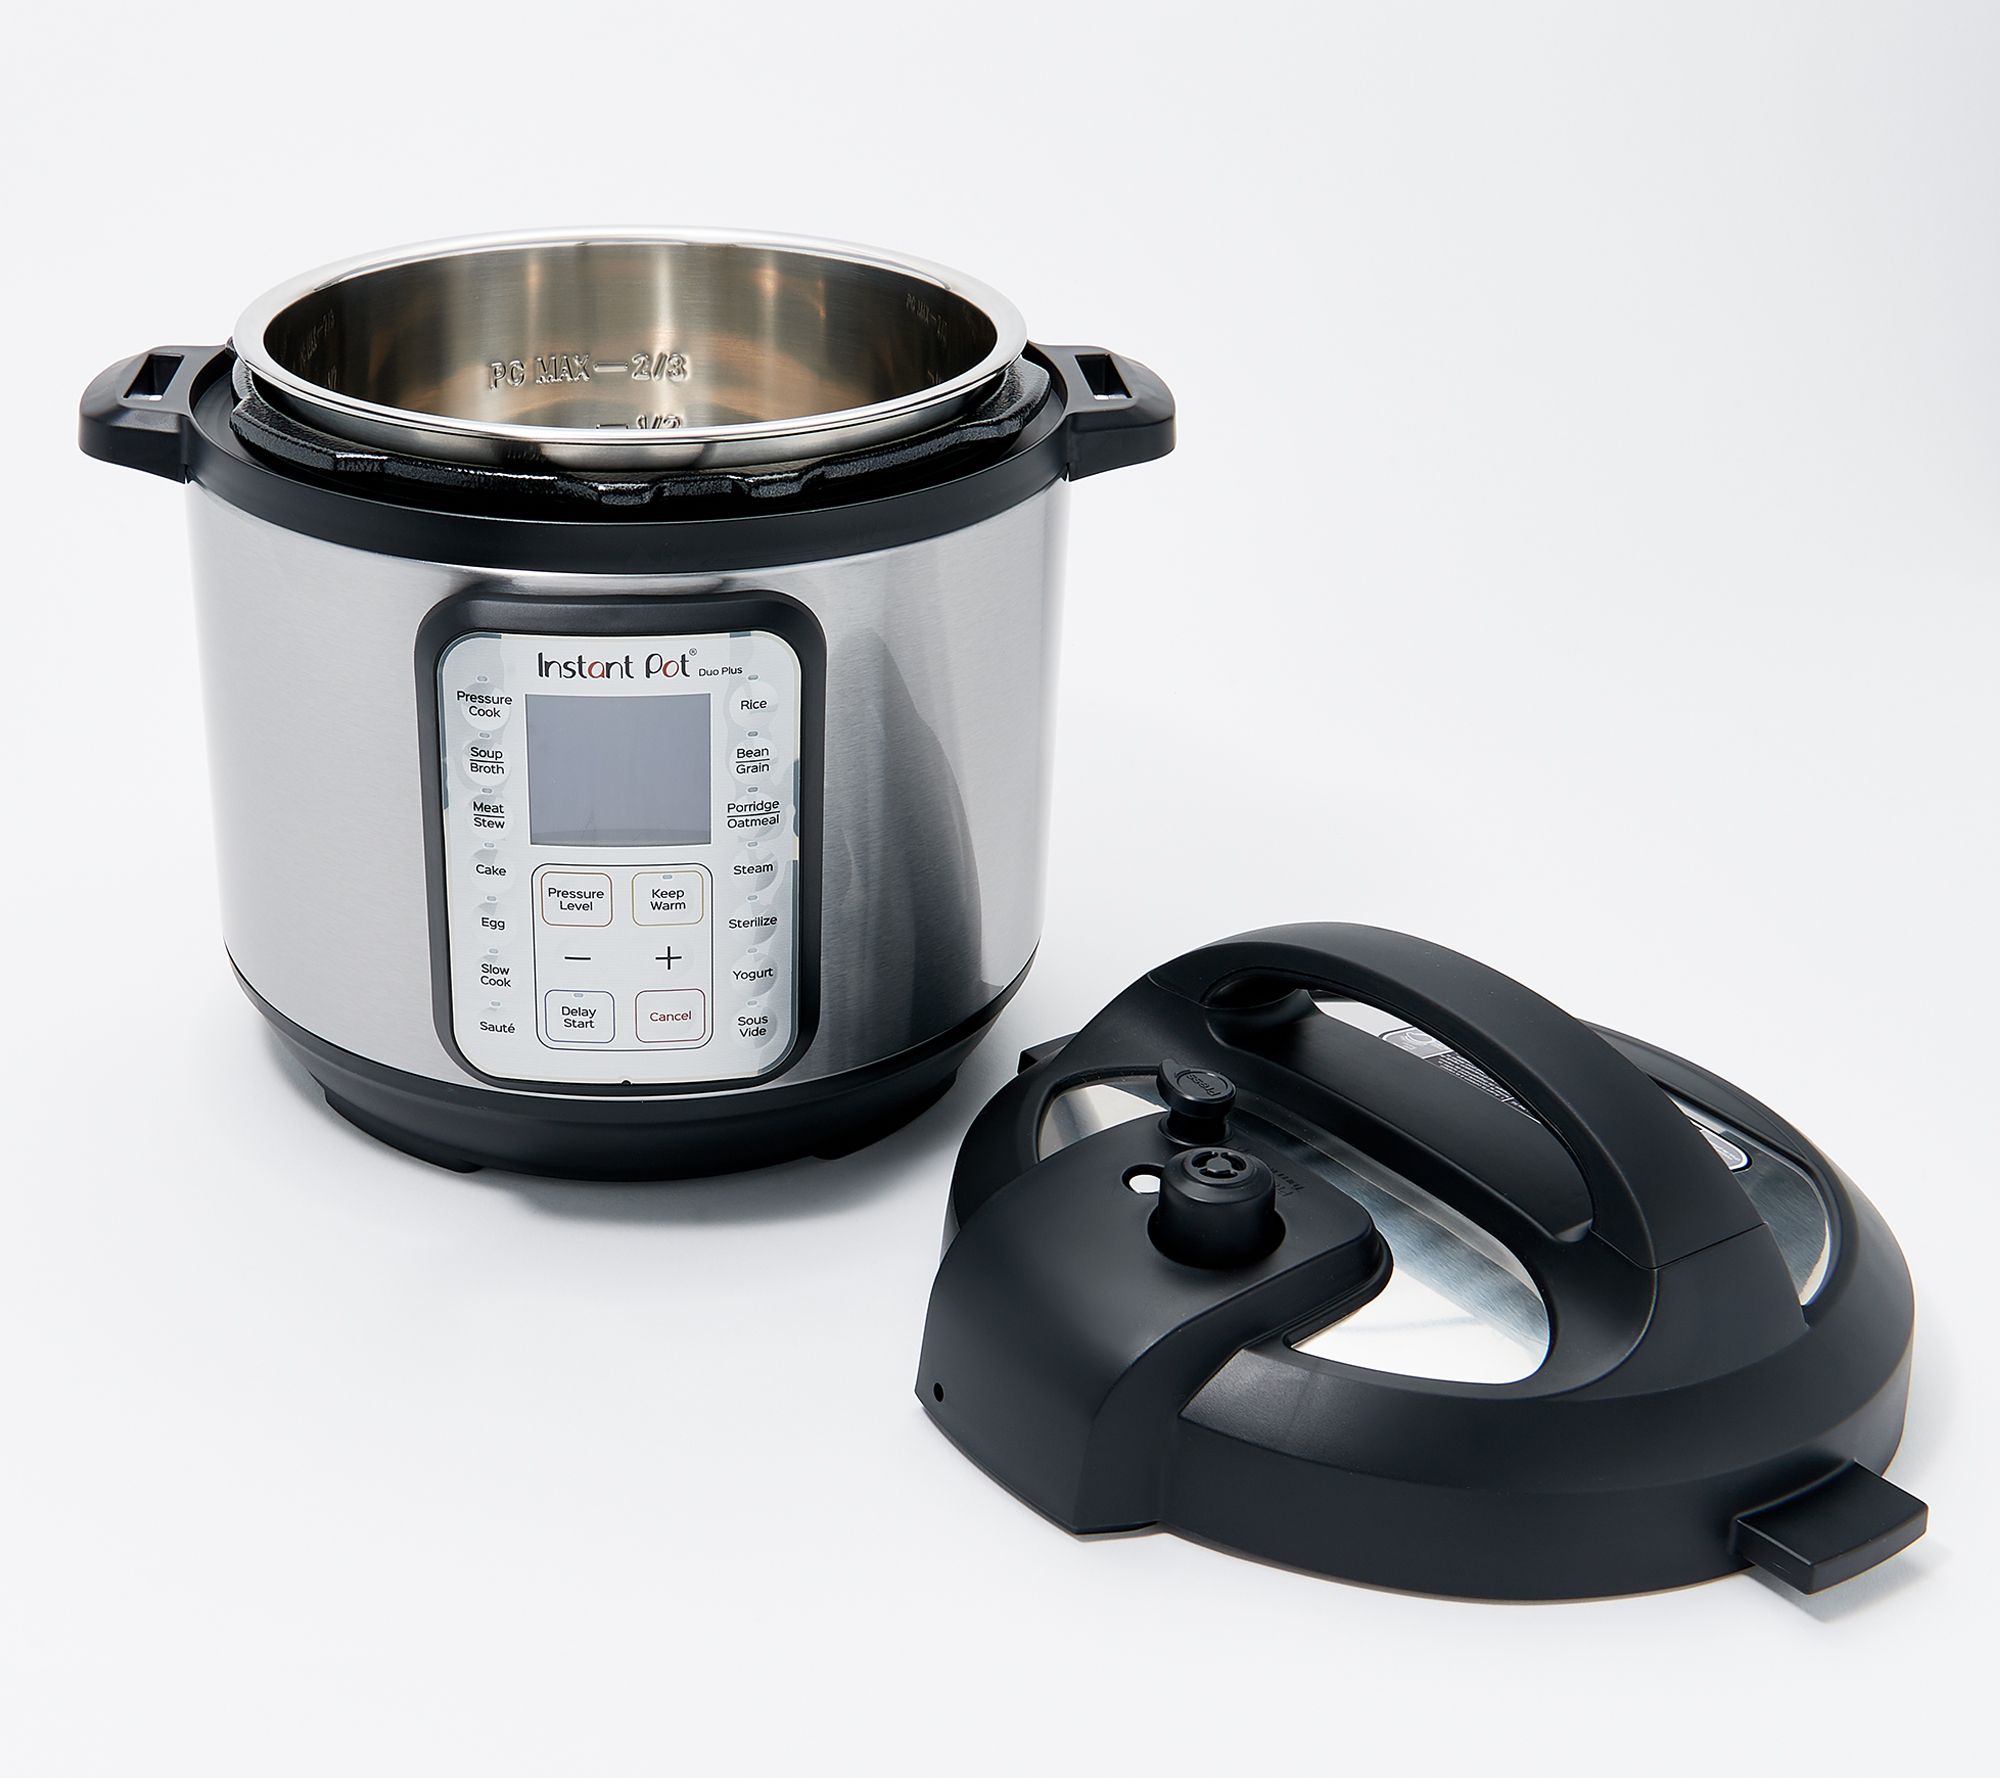 Instant Pot IP-DUO Plus60 6qt. 9-in-1 Pressure Cooker- Sears Marketplace